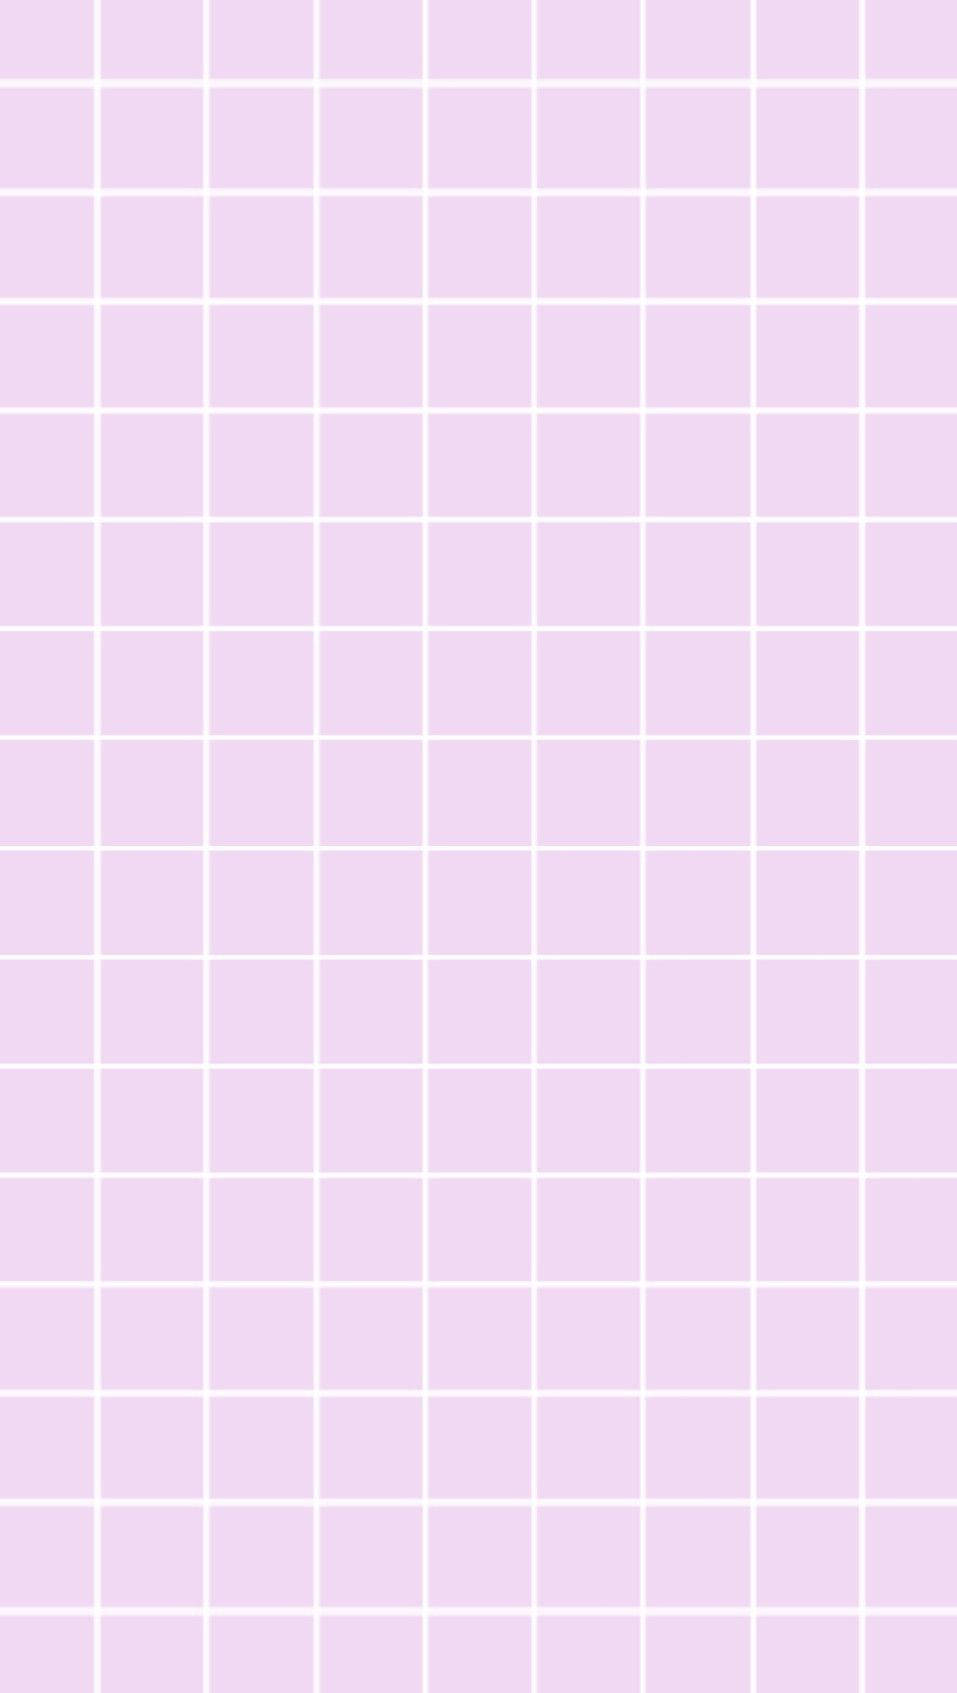 Simple Pink And White Grid Aesthetic Wallpaper